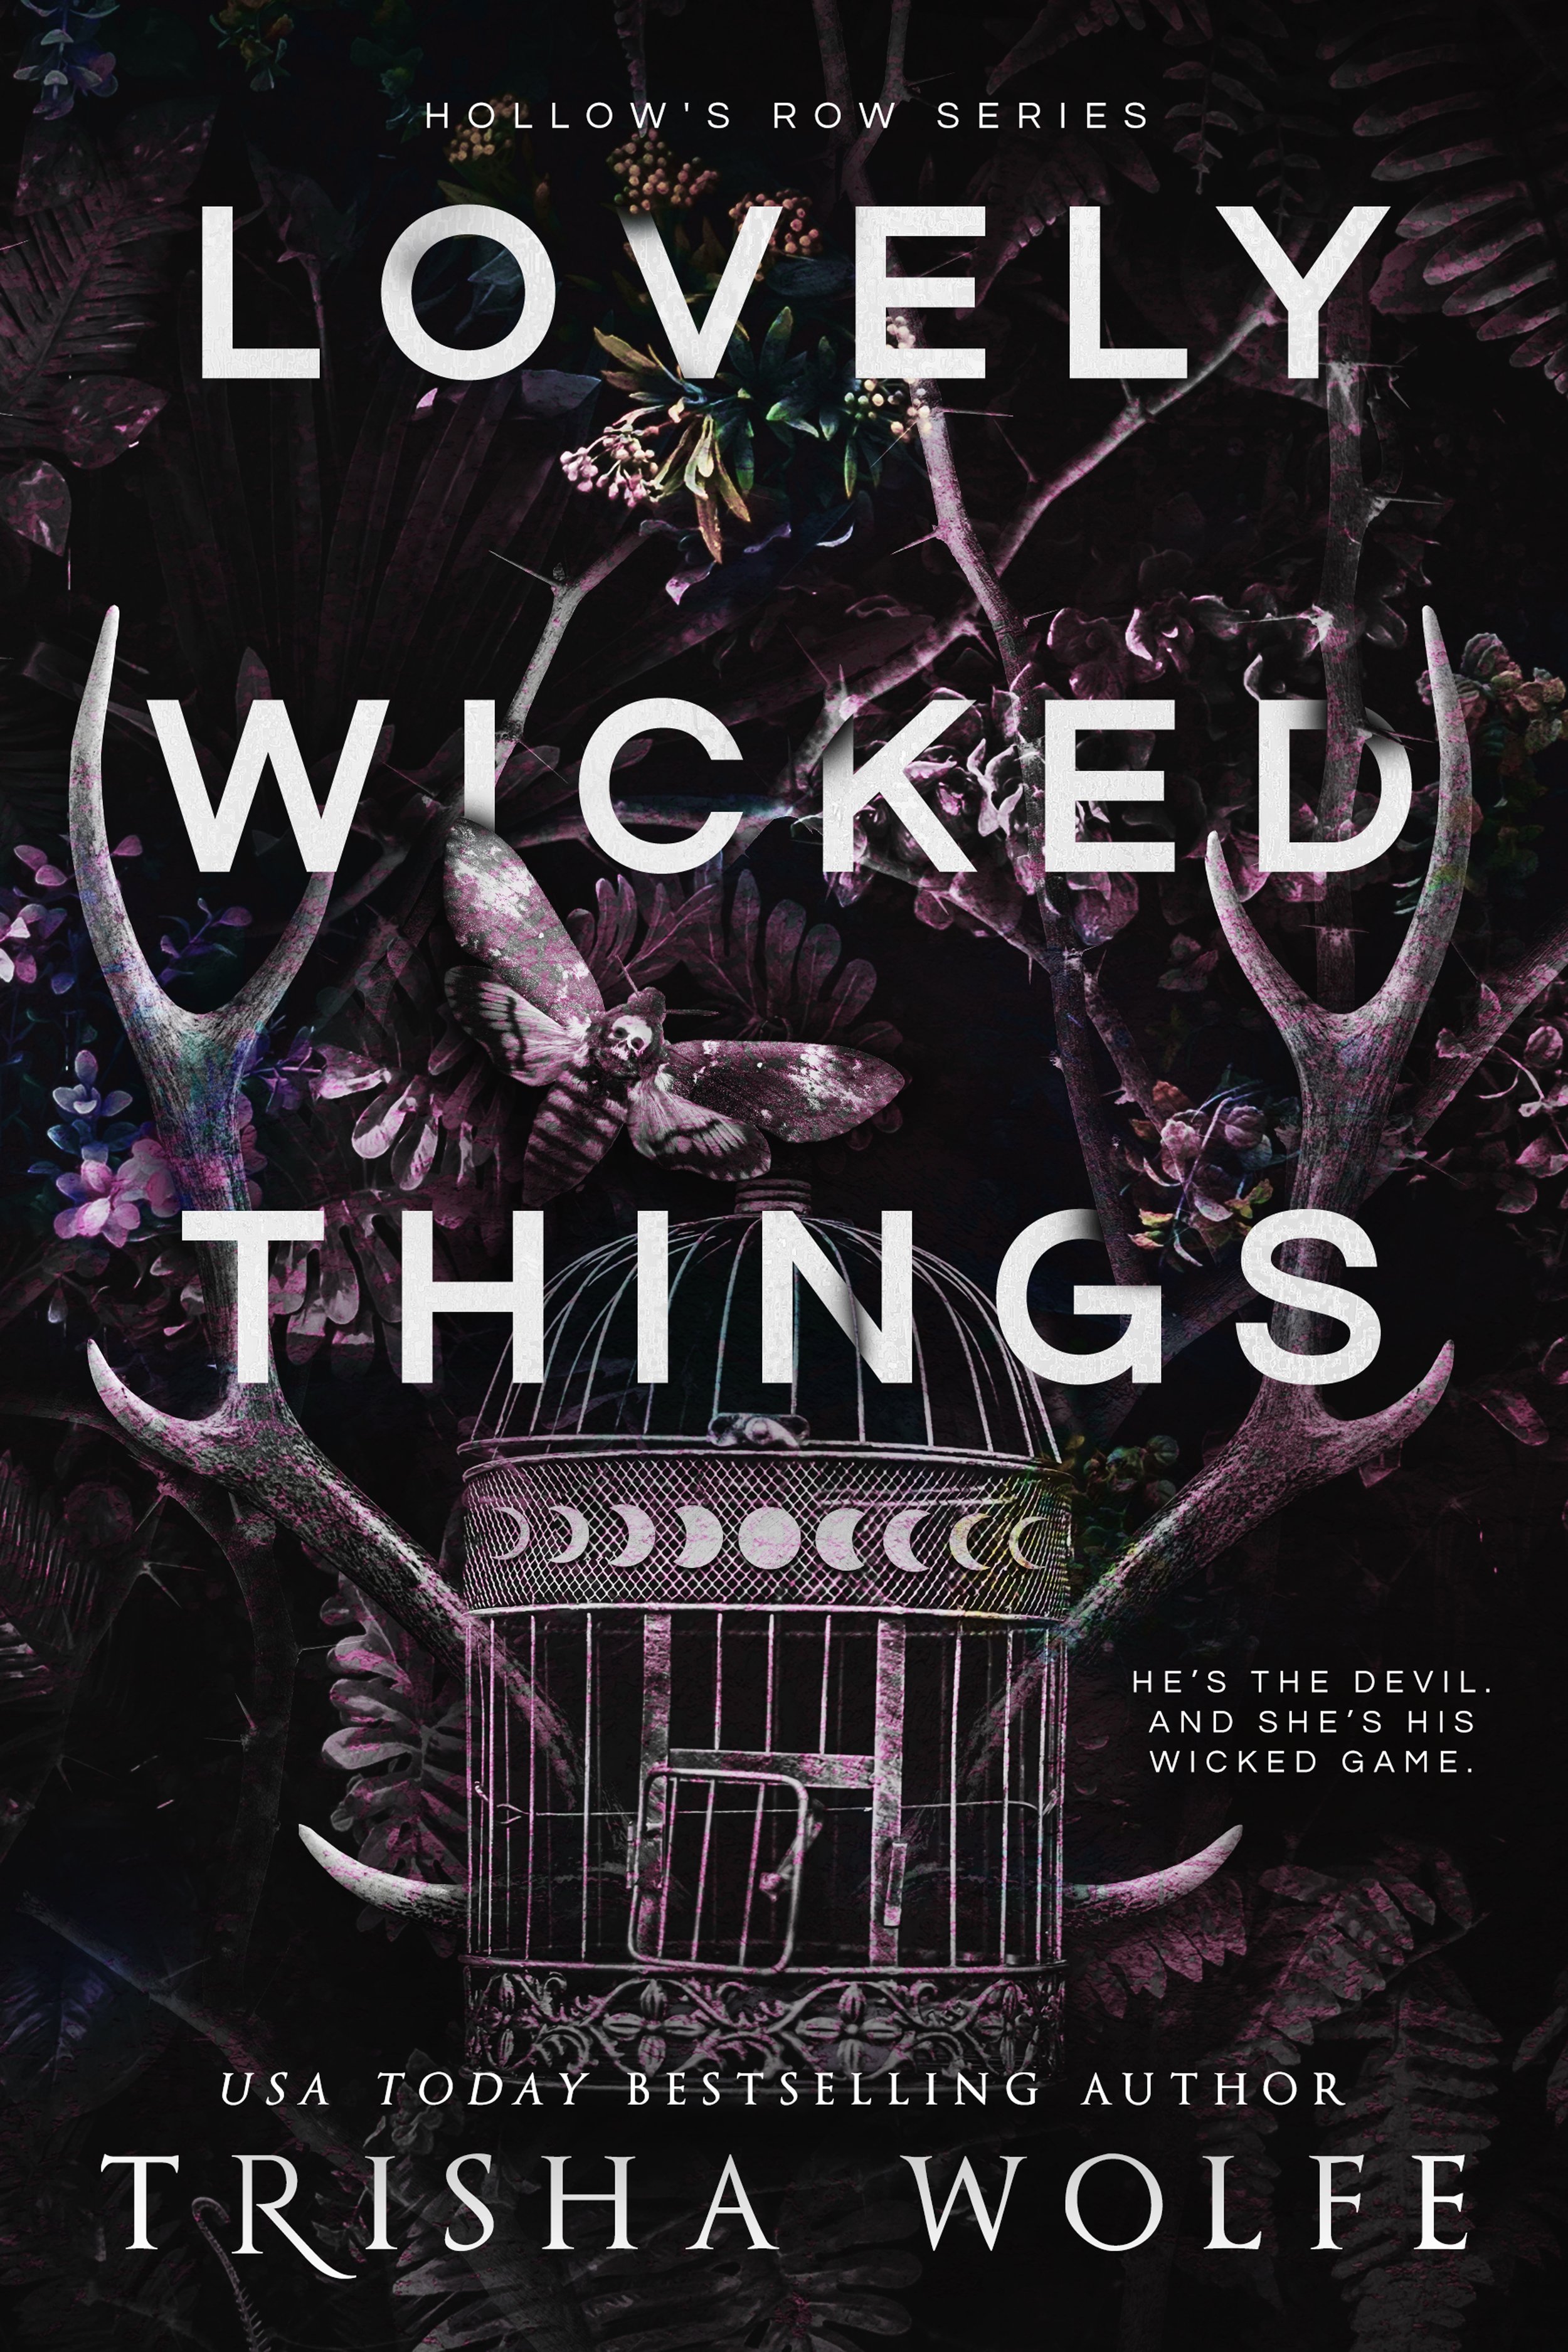 LOVELY WICKED THINGS